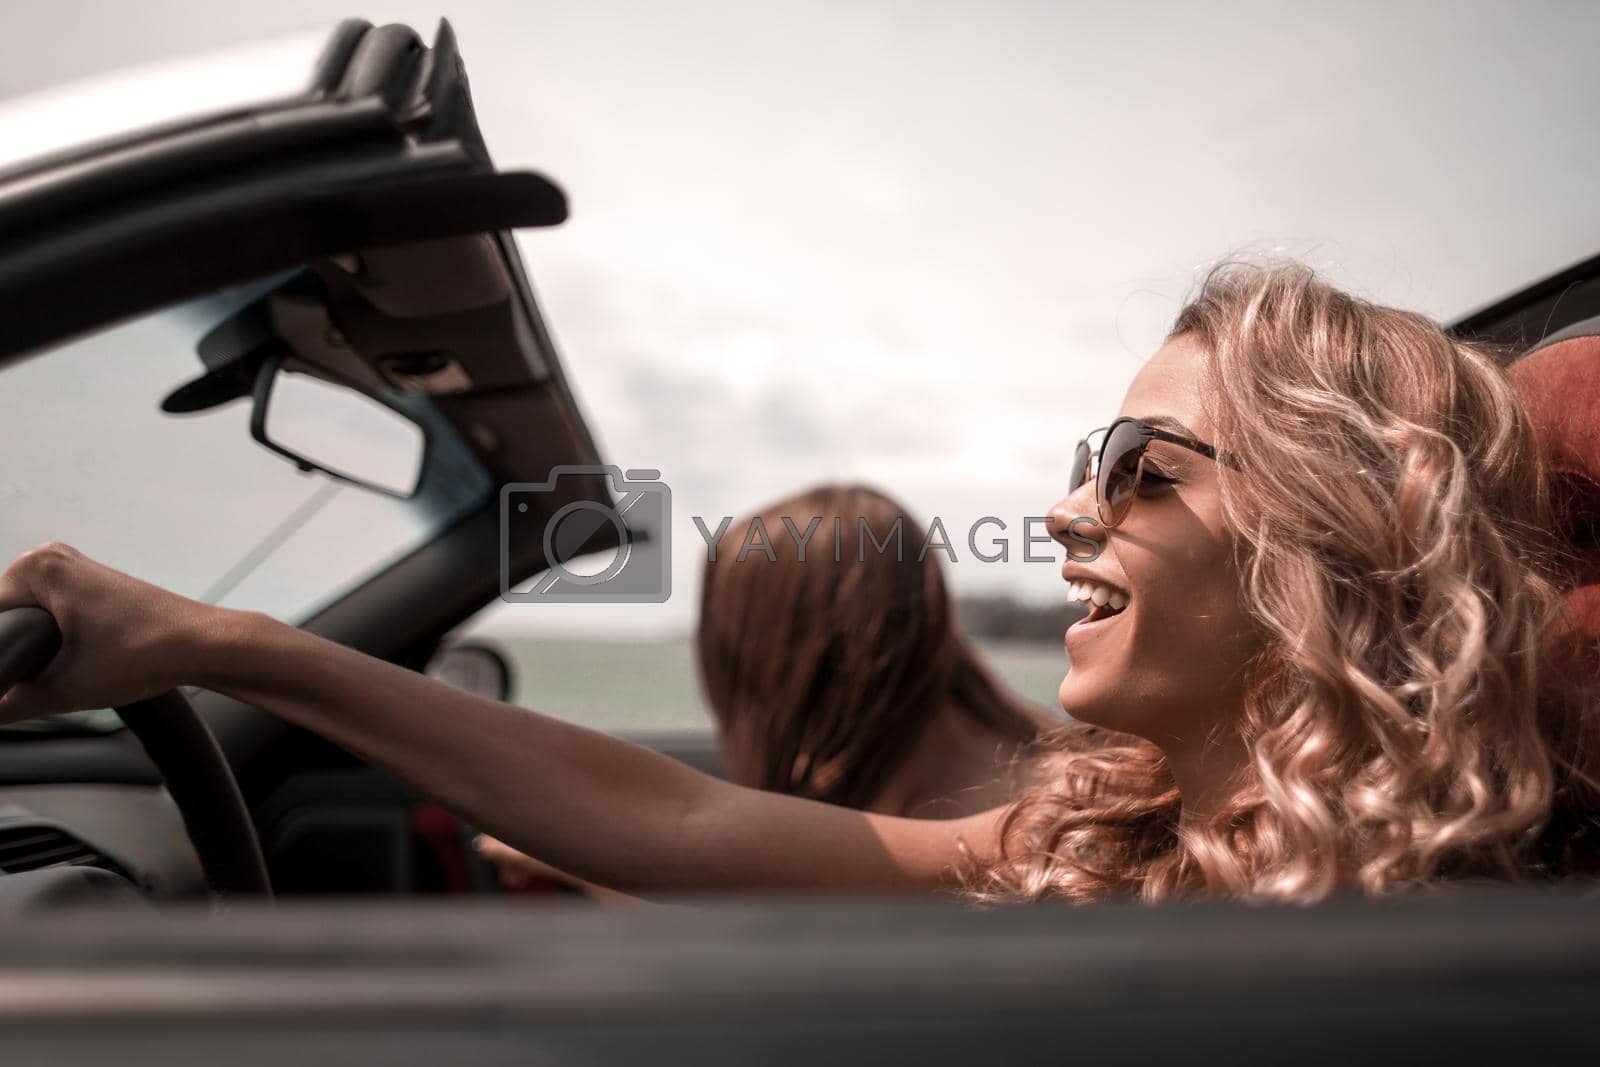 Royalty free image of close up. fashionable blonde driving a convertible by asdf